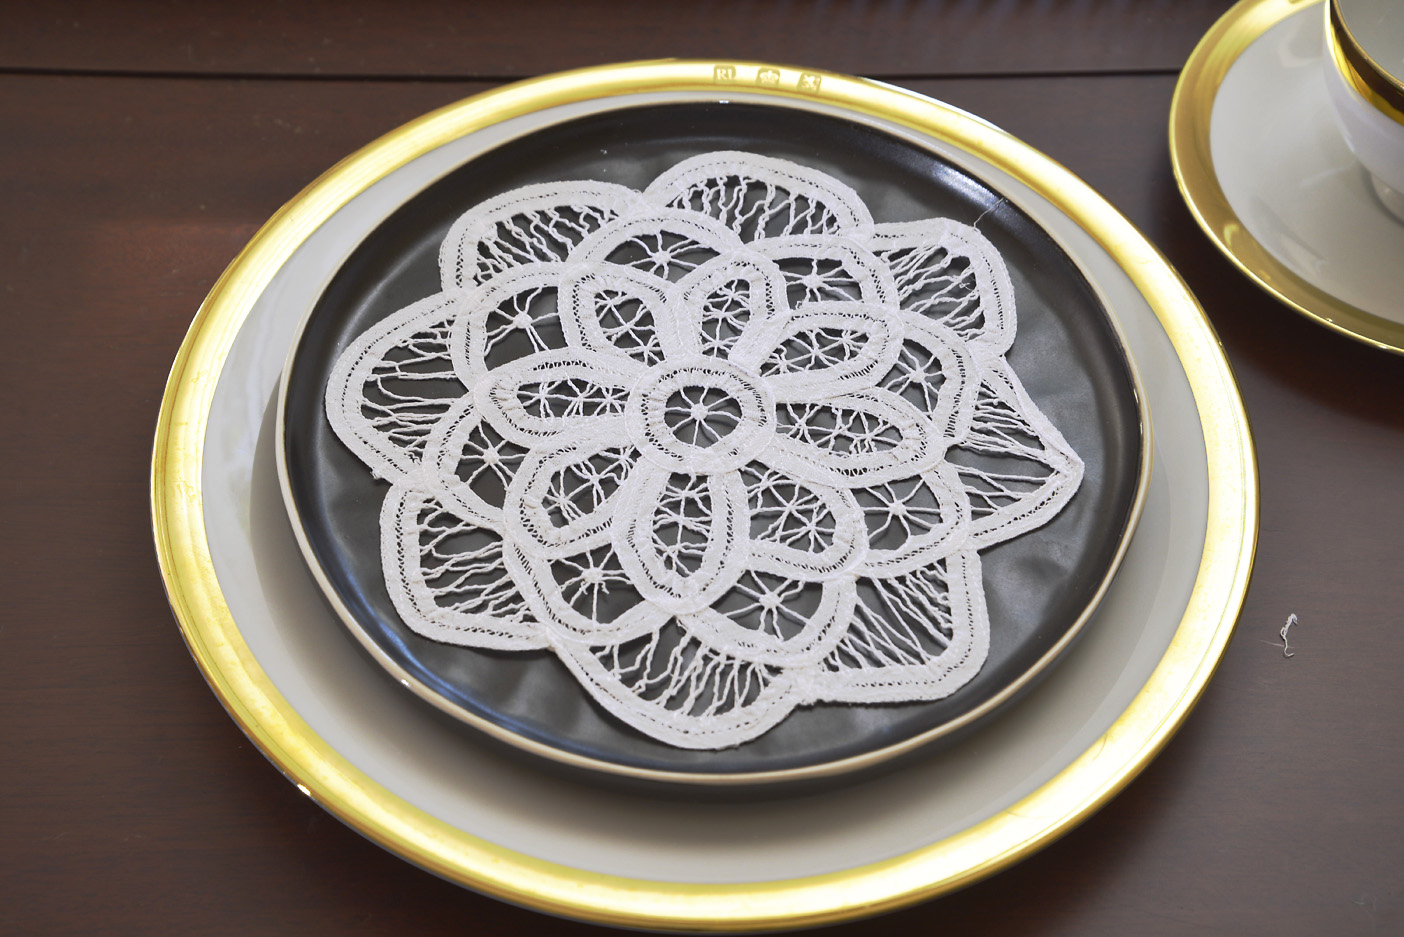 7" Round, Belgium 109, All Lace Doily